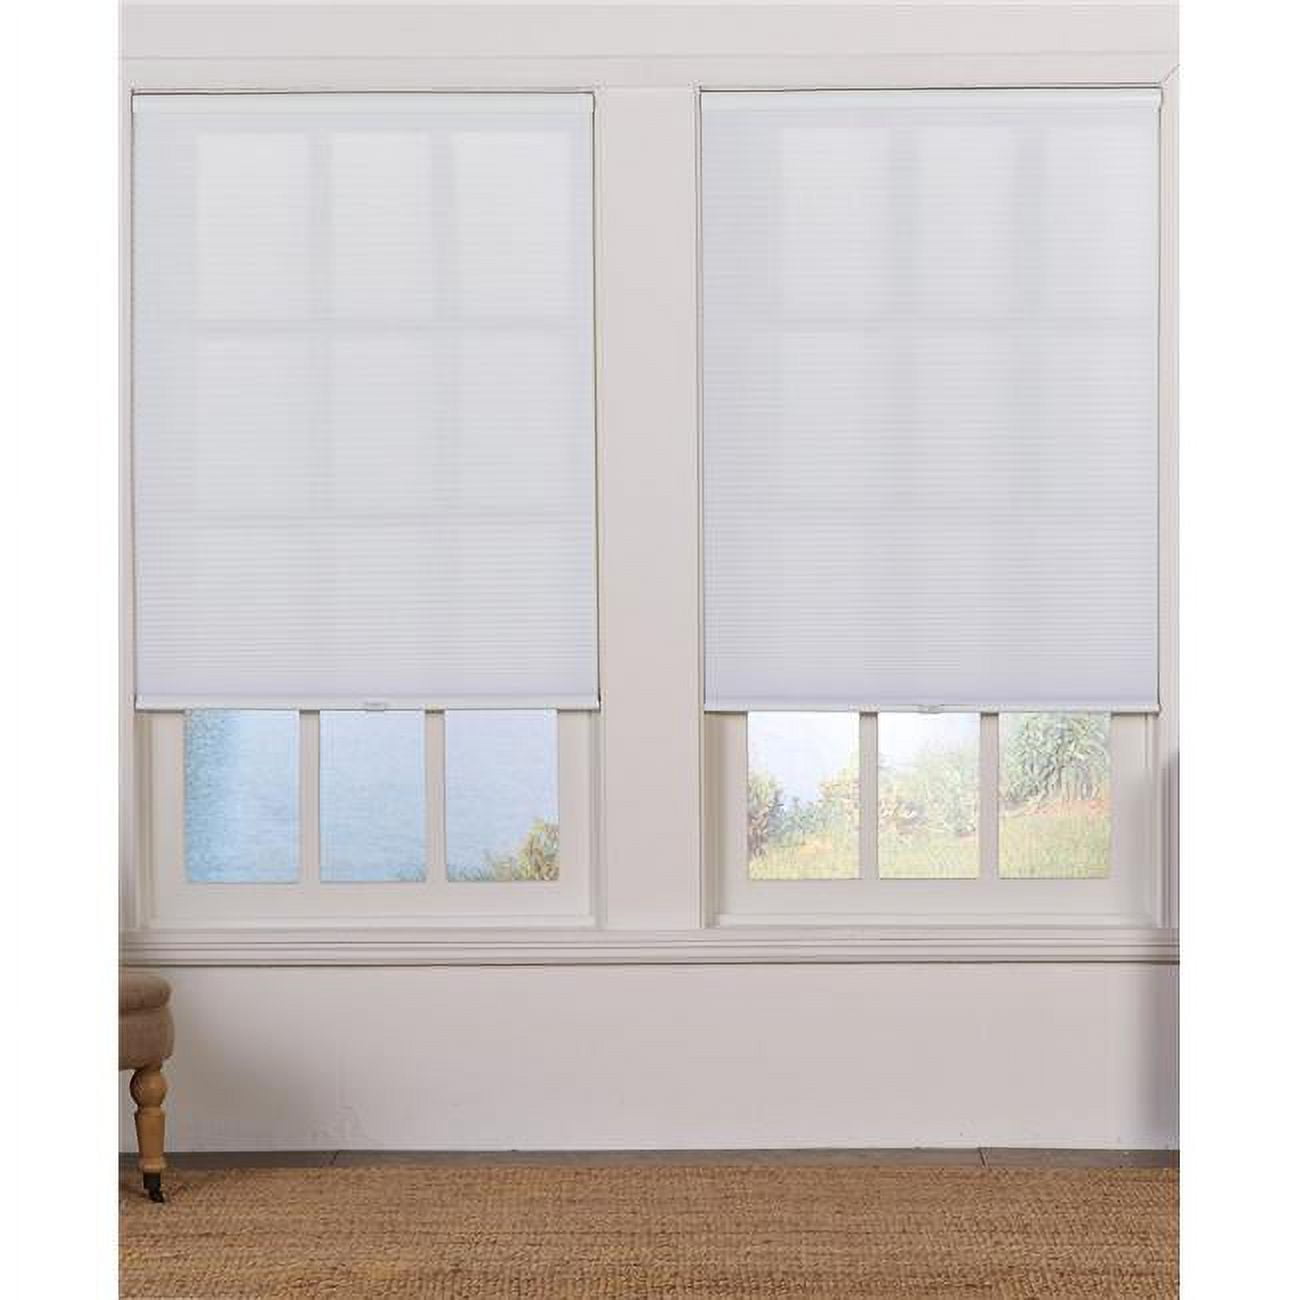 Ubc295x72wt Cordless Light Filtering Cellular Shade, White - 29.5 X 72 In.